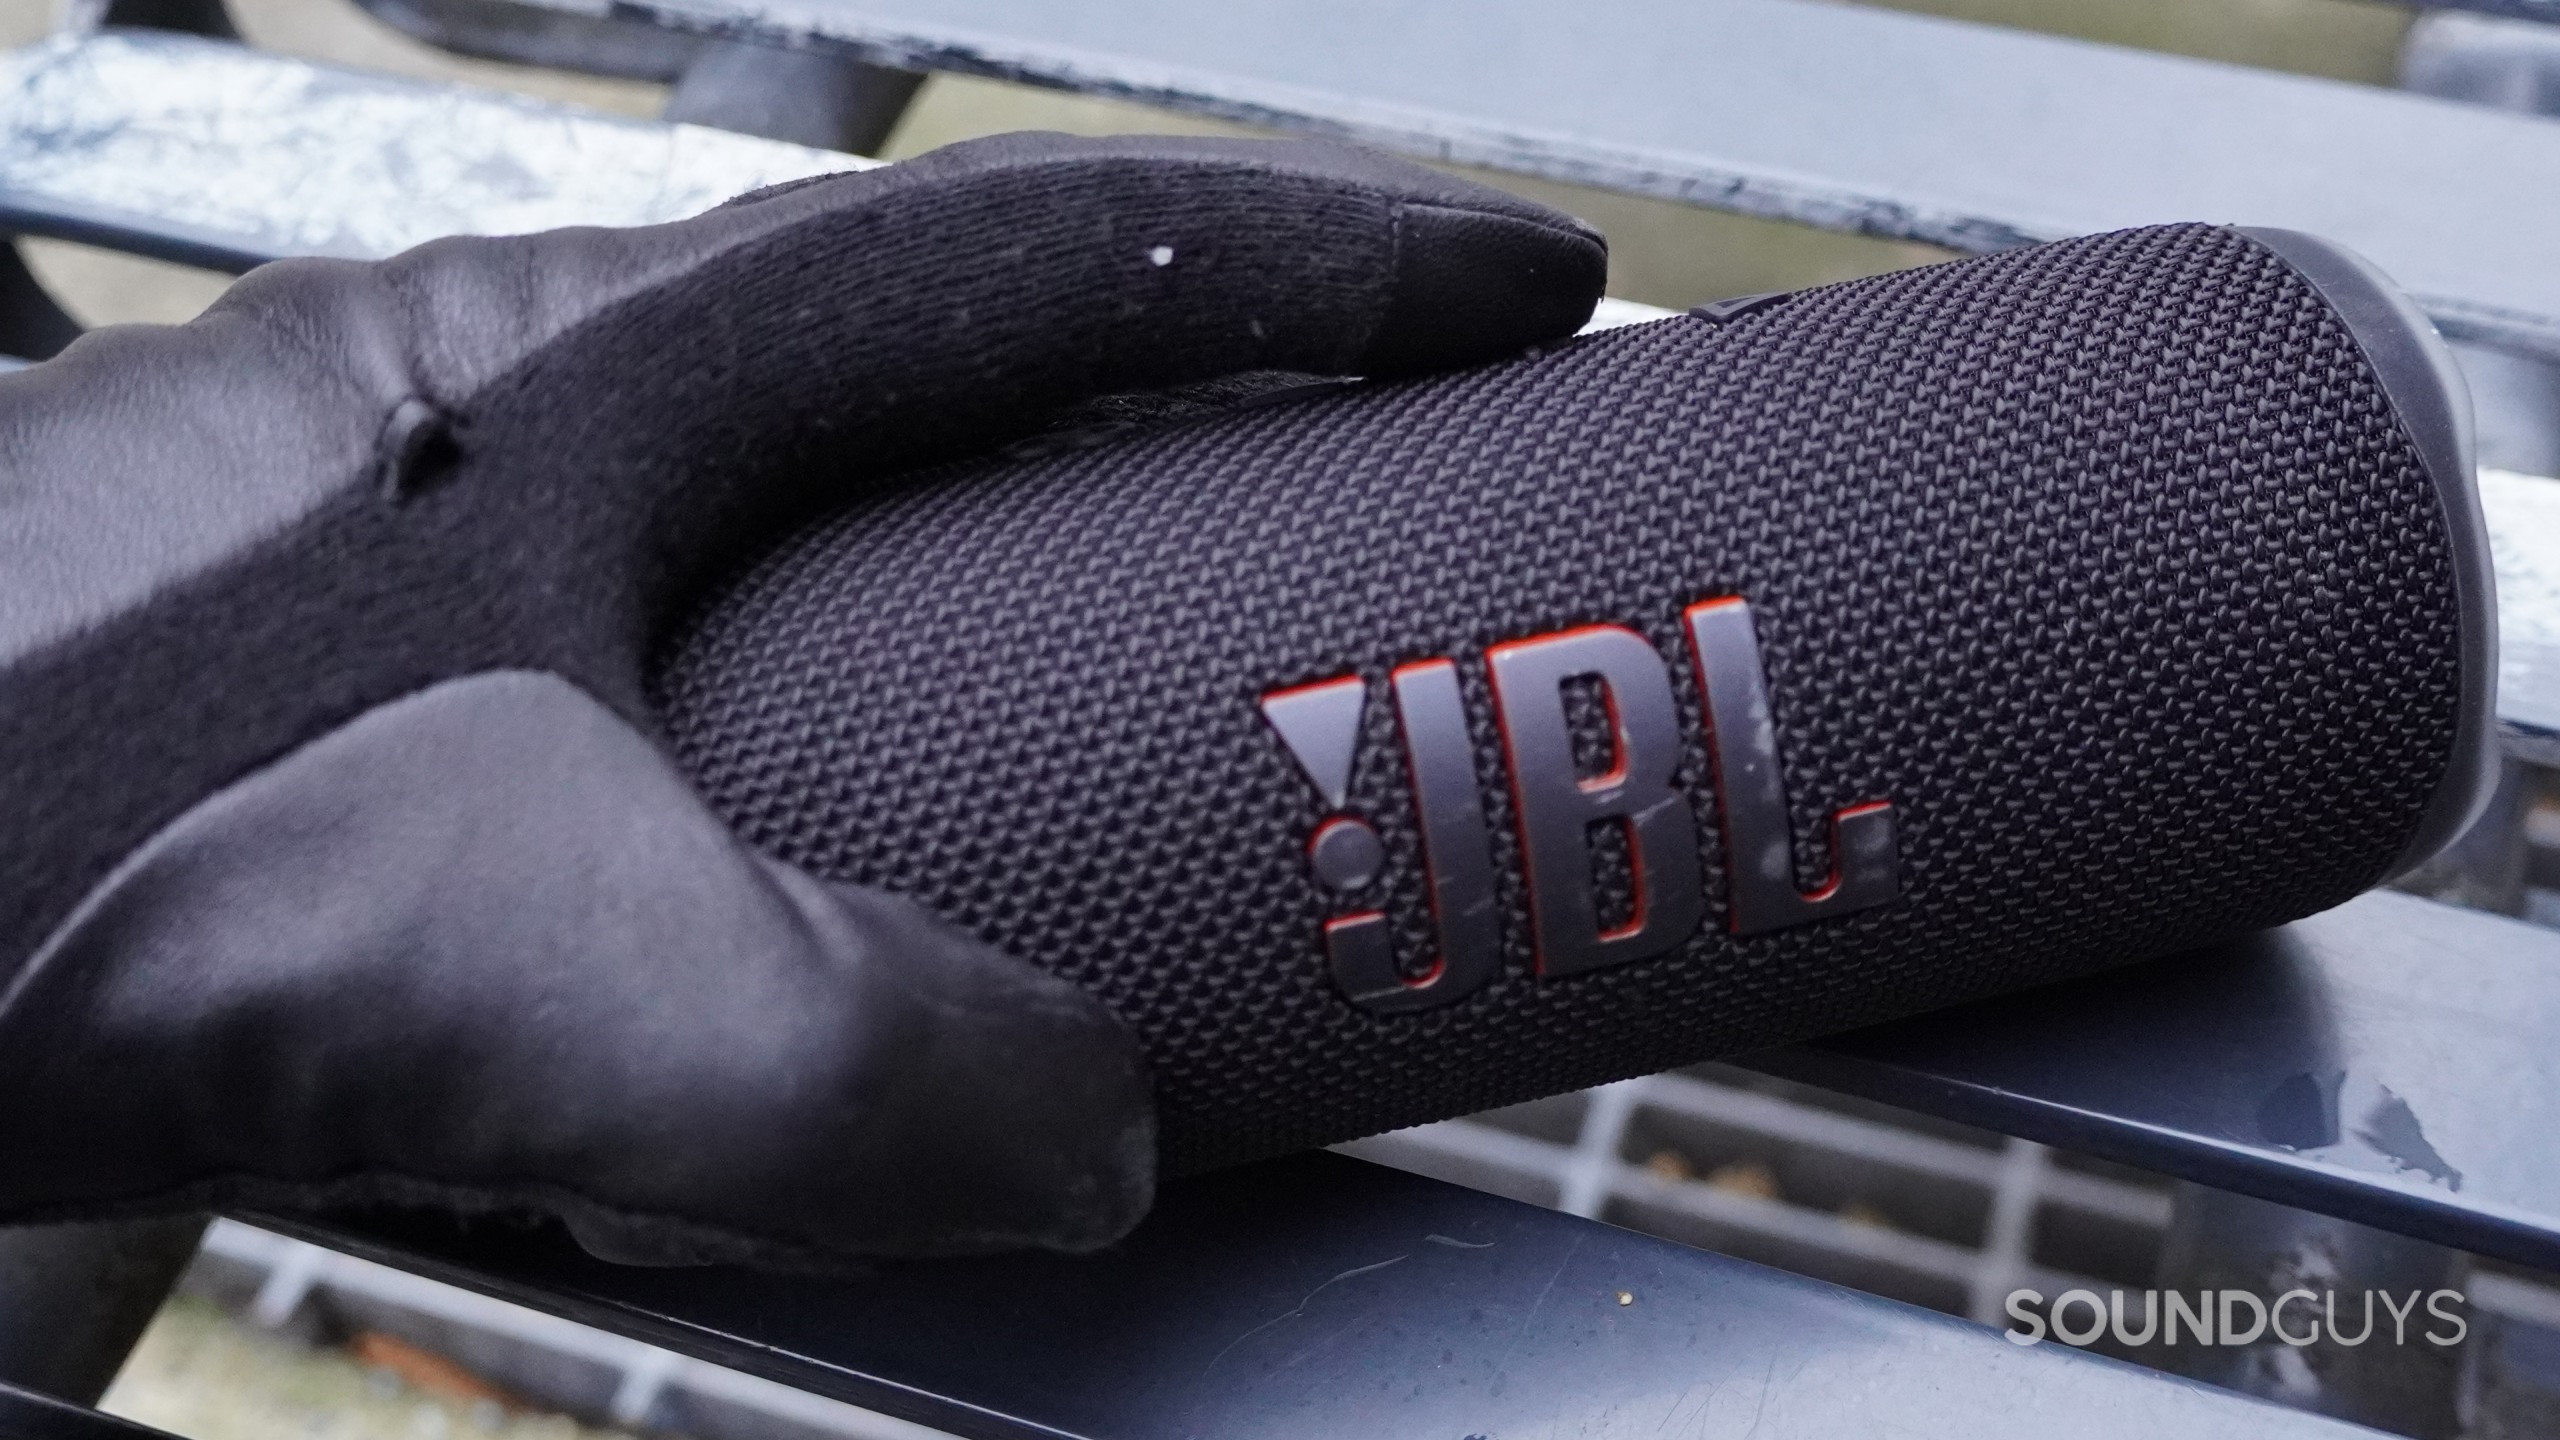 A hand wearing a black leather glove presses a button on the JBL Flip 6 Bluetooth speaker sitting on a metal bench.